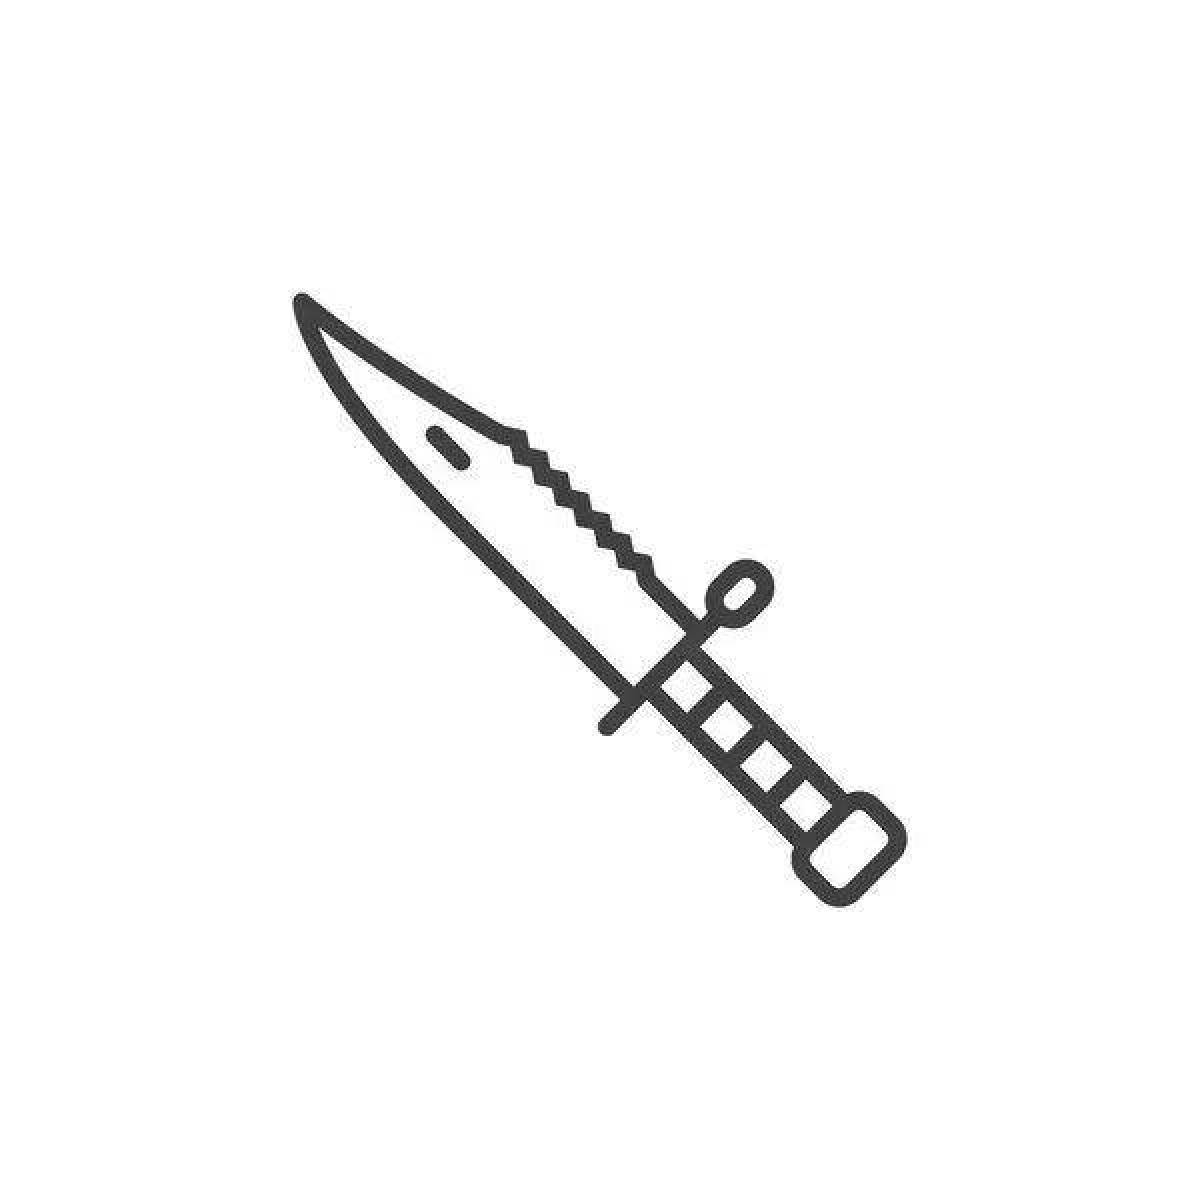 M9 fat knife coloring page